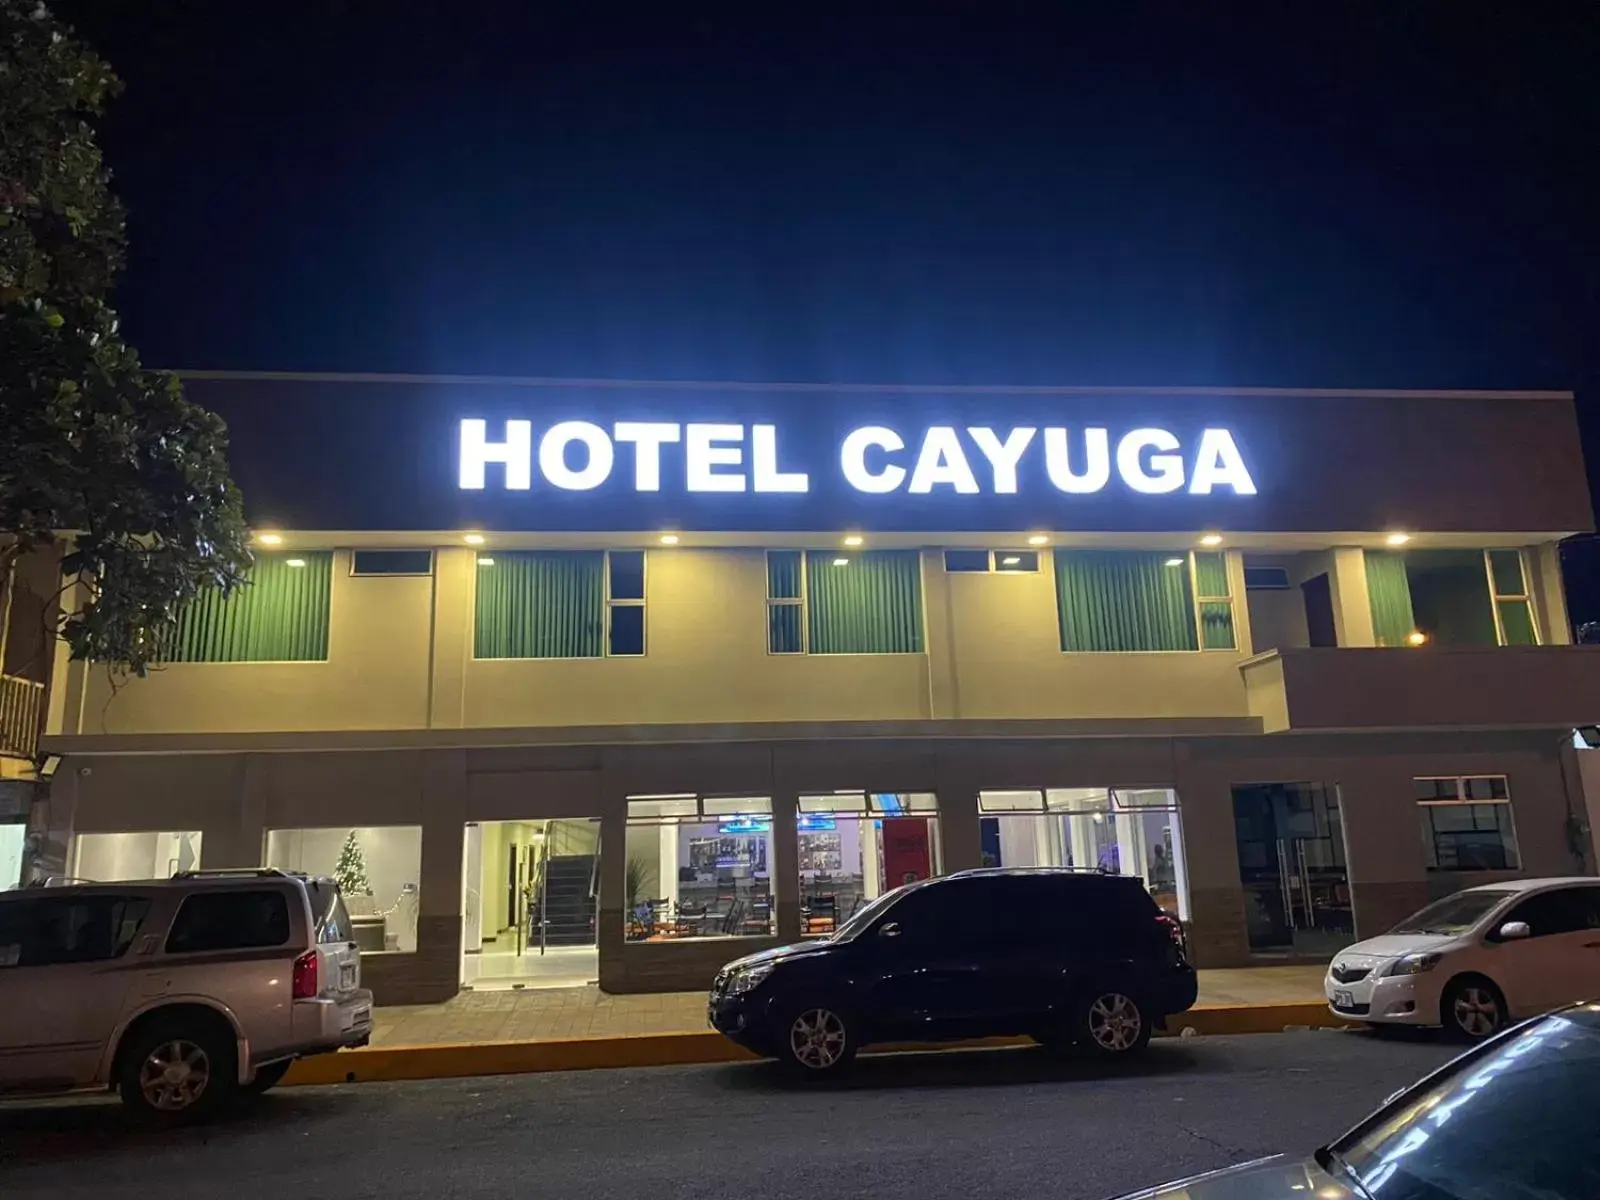 Property Building in Hotel Cayuga